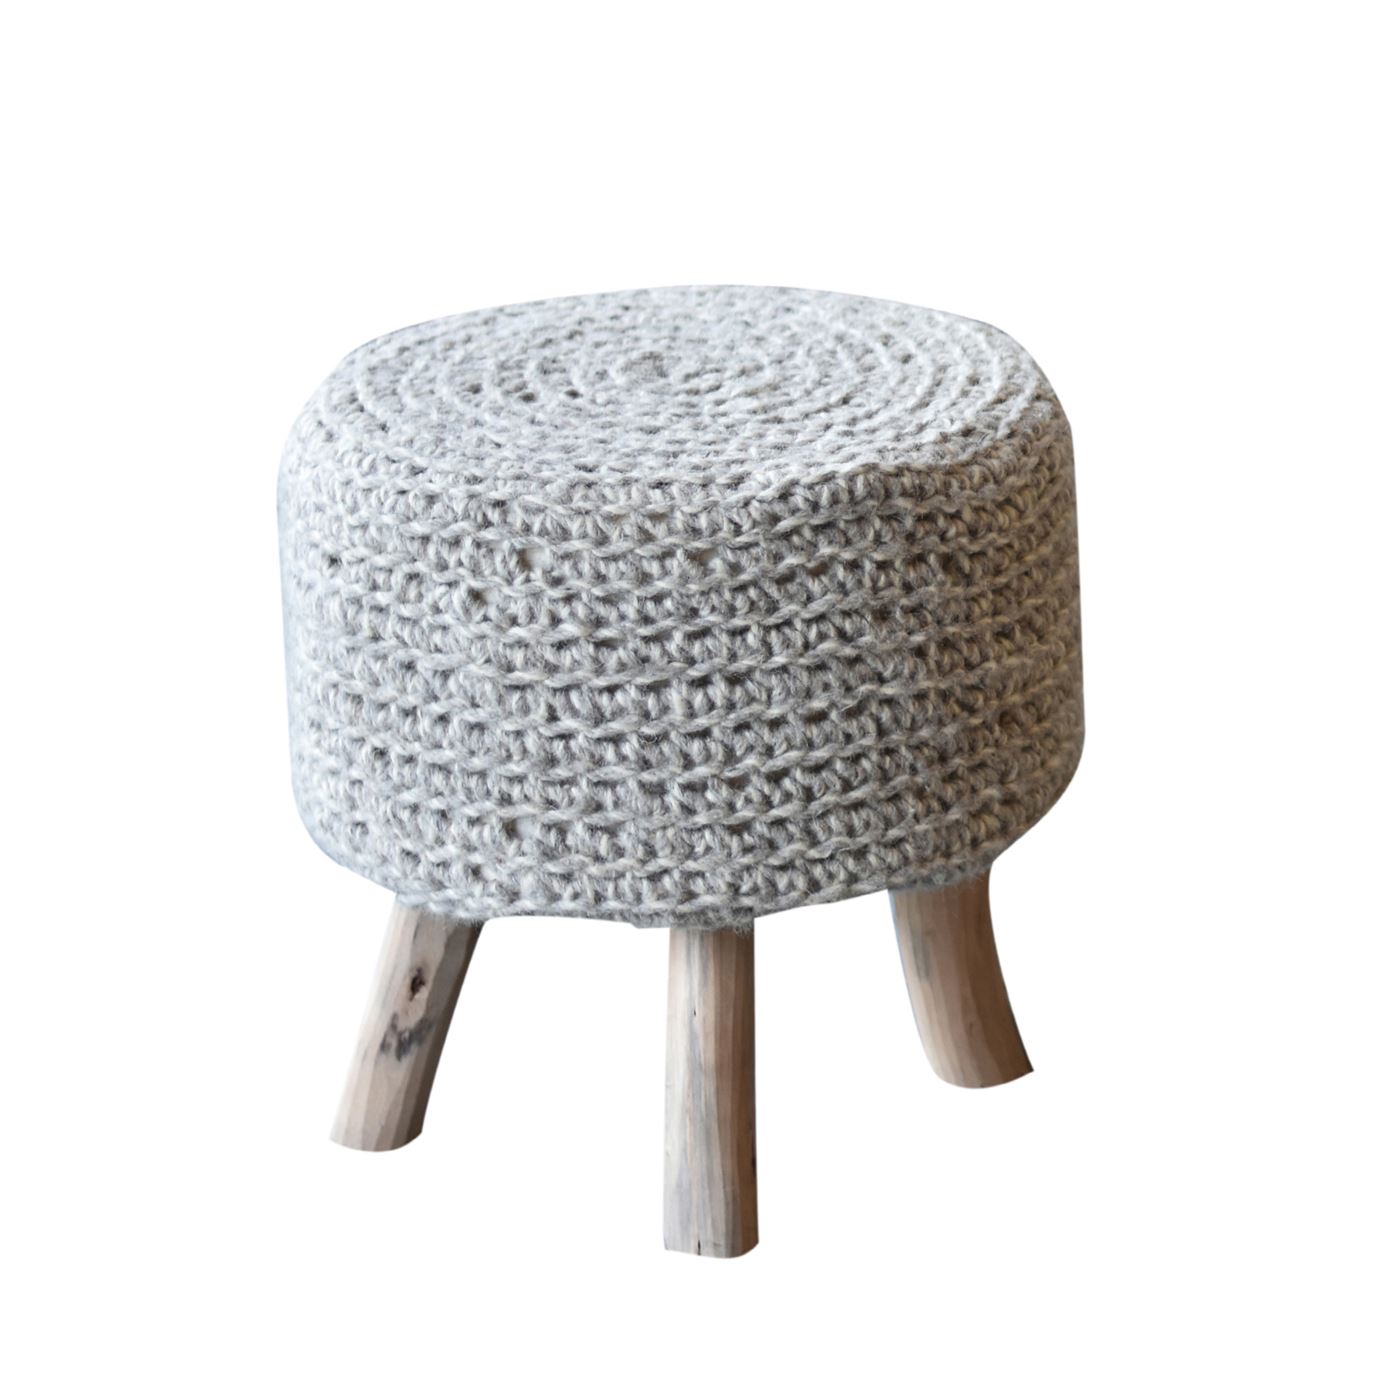 Montana Round Stool, Wool, Grey, Hm Knitted, Flat Weave 